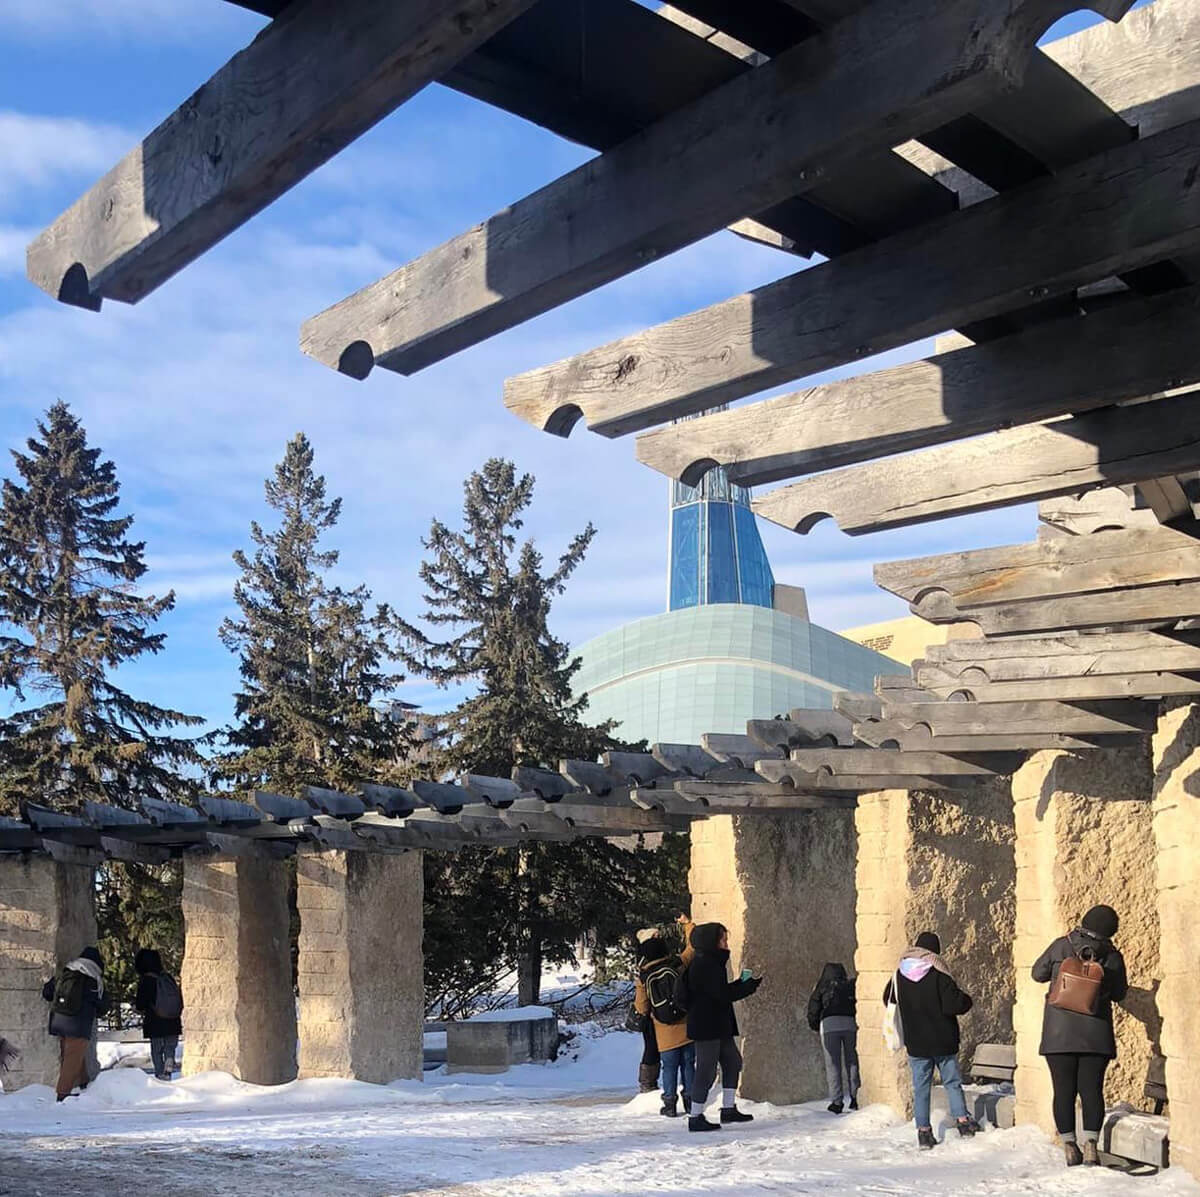 Exploring the fossil record in the Tyndall stone at The Forks